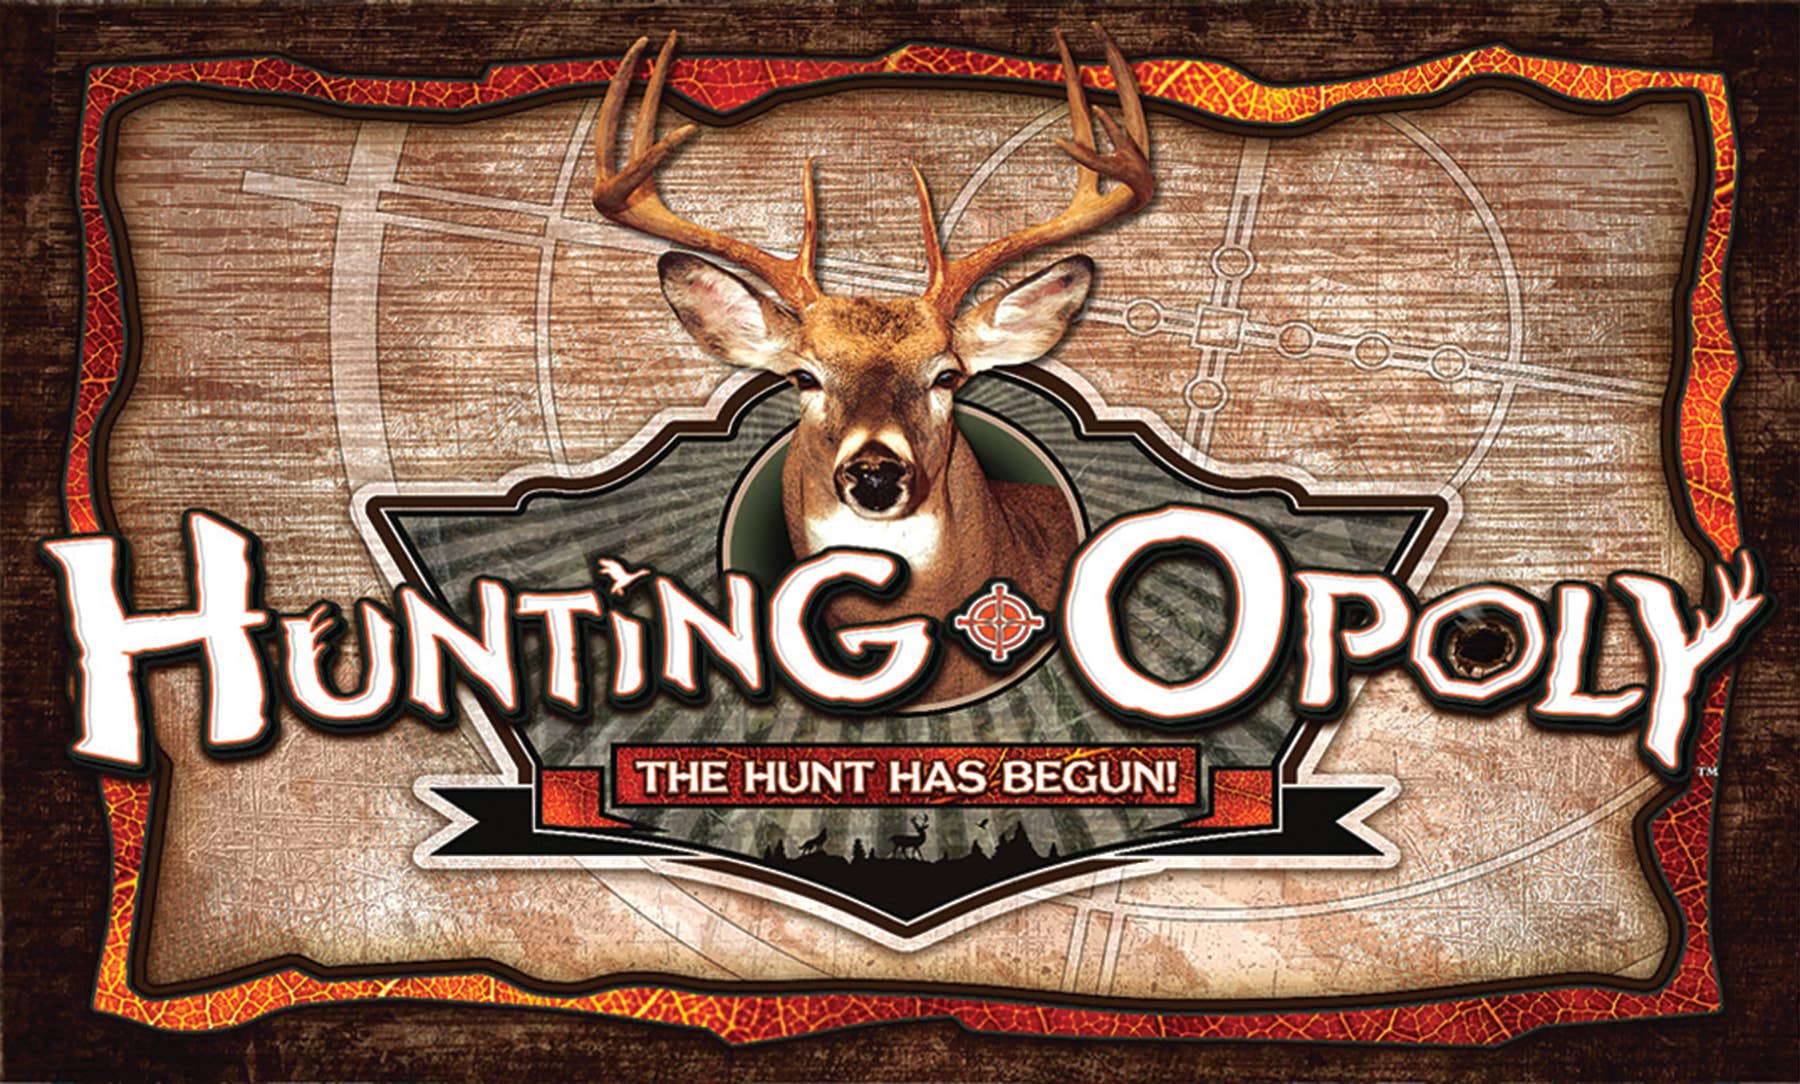 Hunting Opoly, the hunt has begun. Funny gift for hunters.